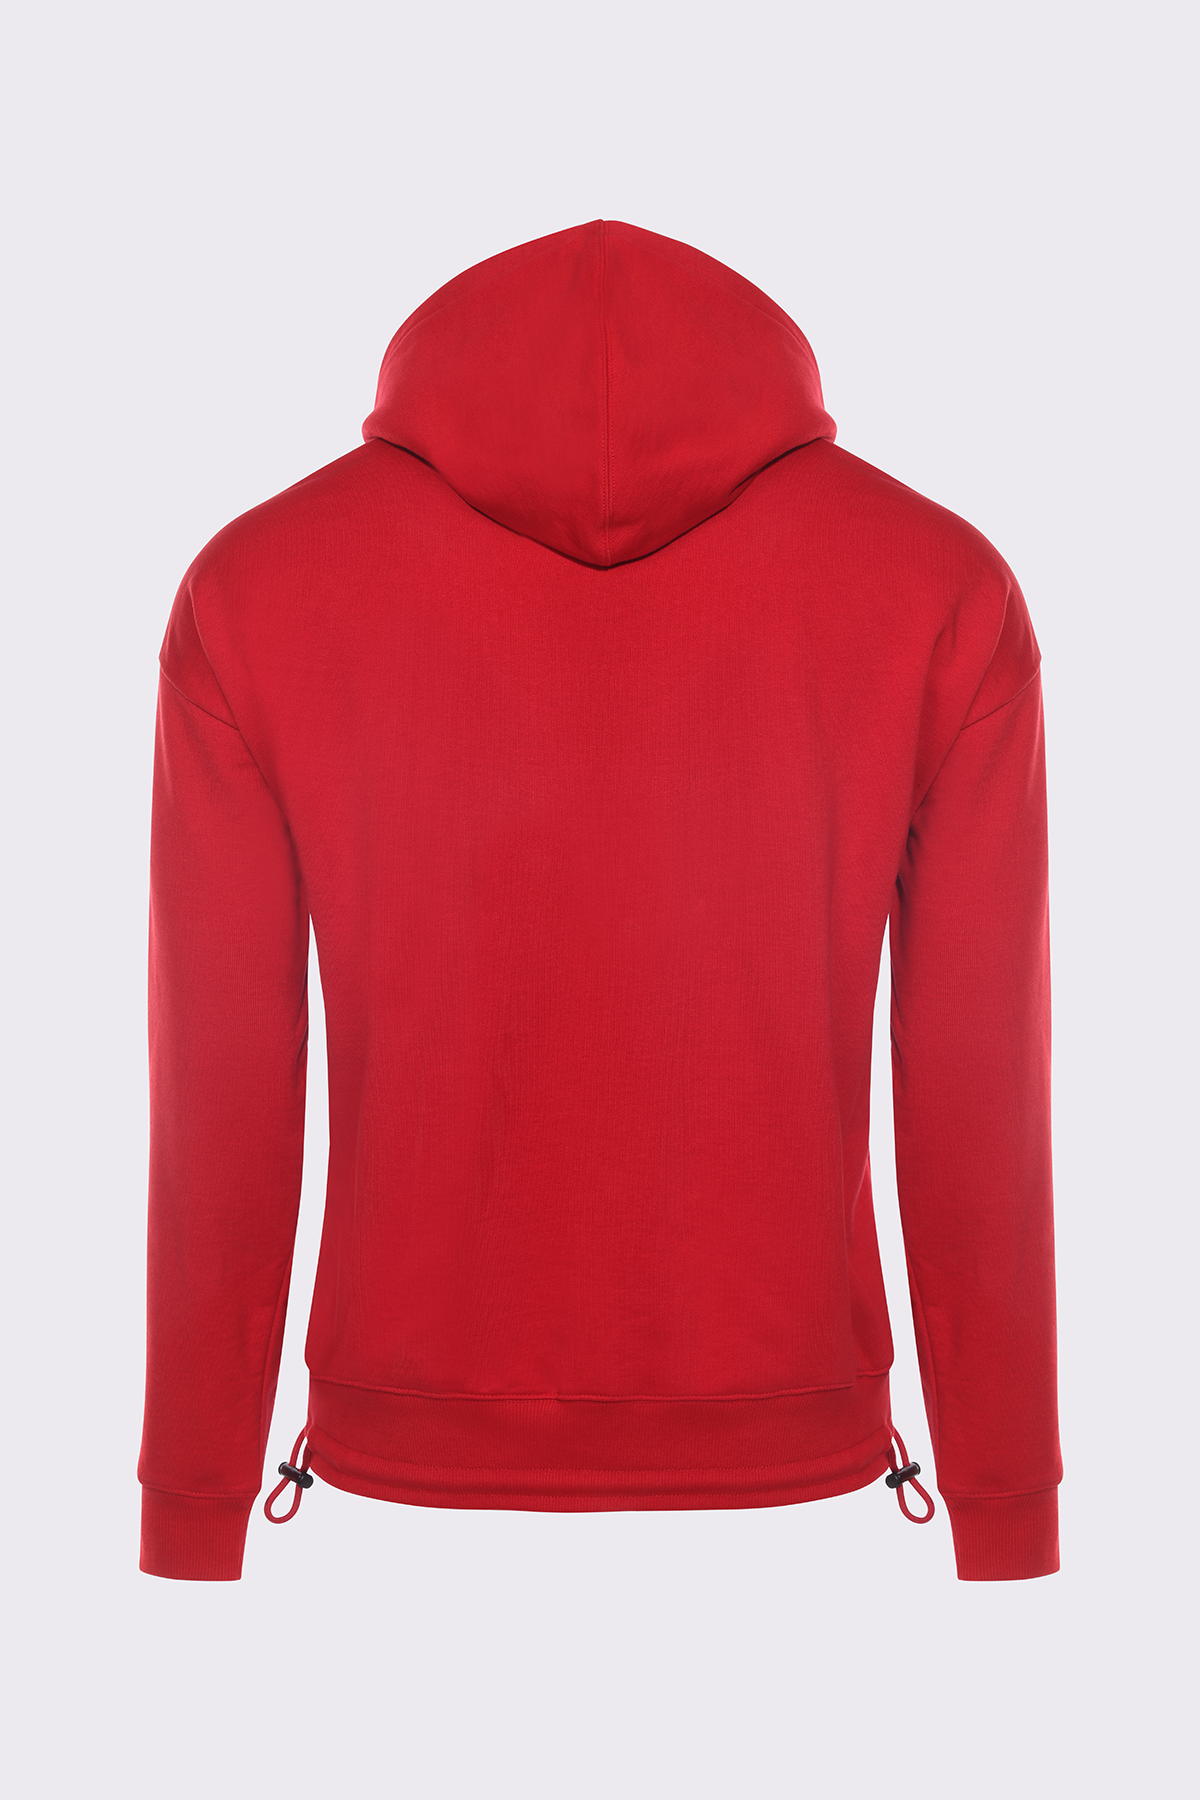 rta red hoodie for men and women